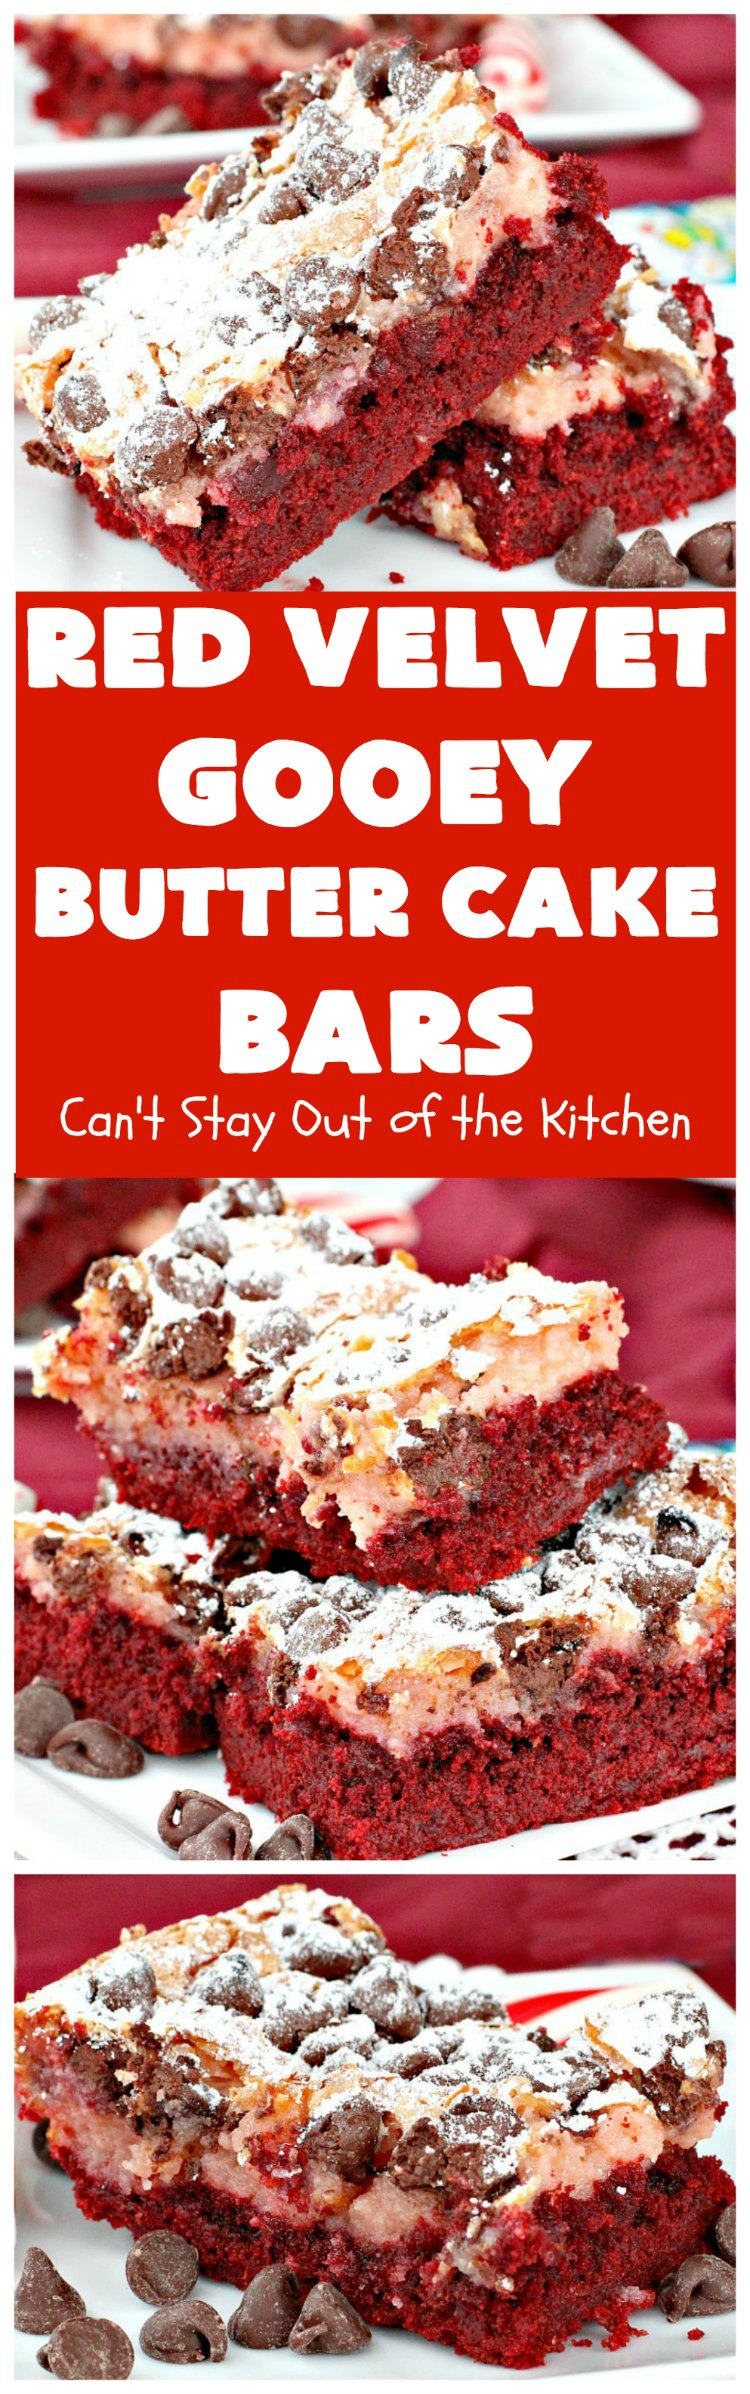 Red Velvet Gooey Butter Cake Bars | Can't Stay Out of the Kitchen